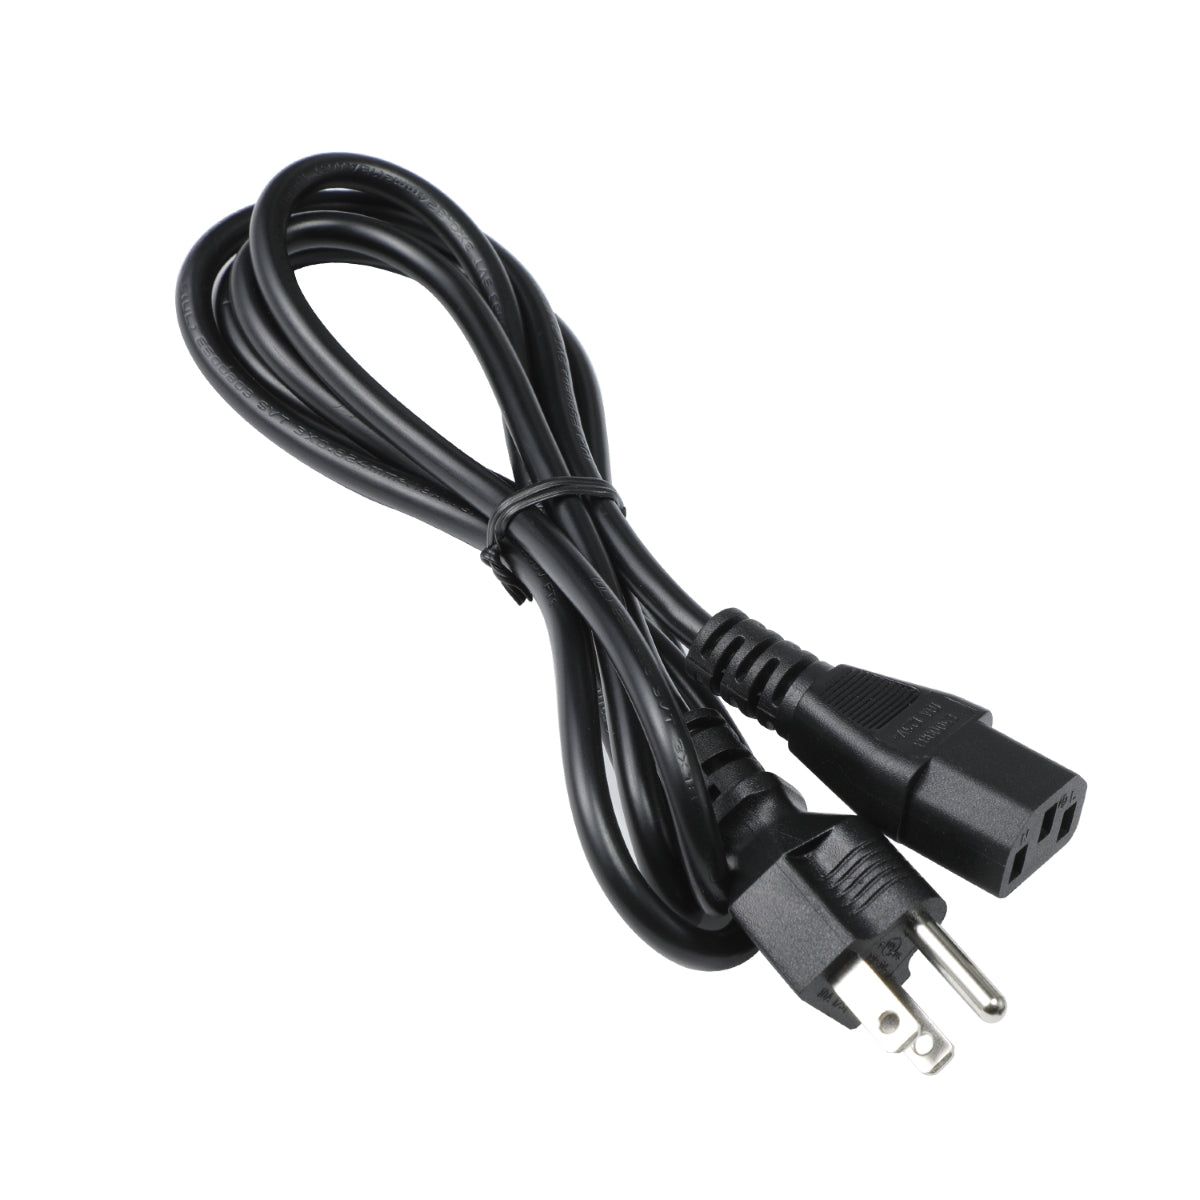 Power Cable for Philips 276B1 Monitor.